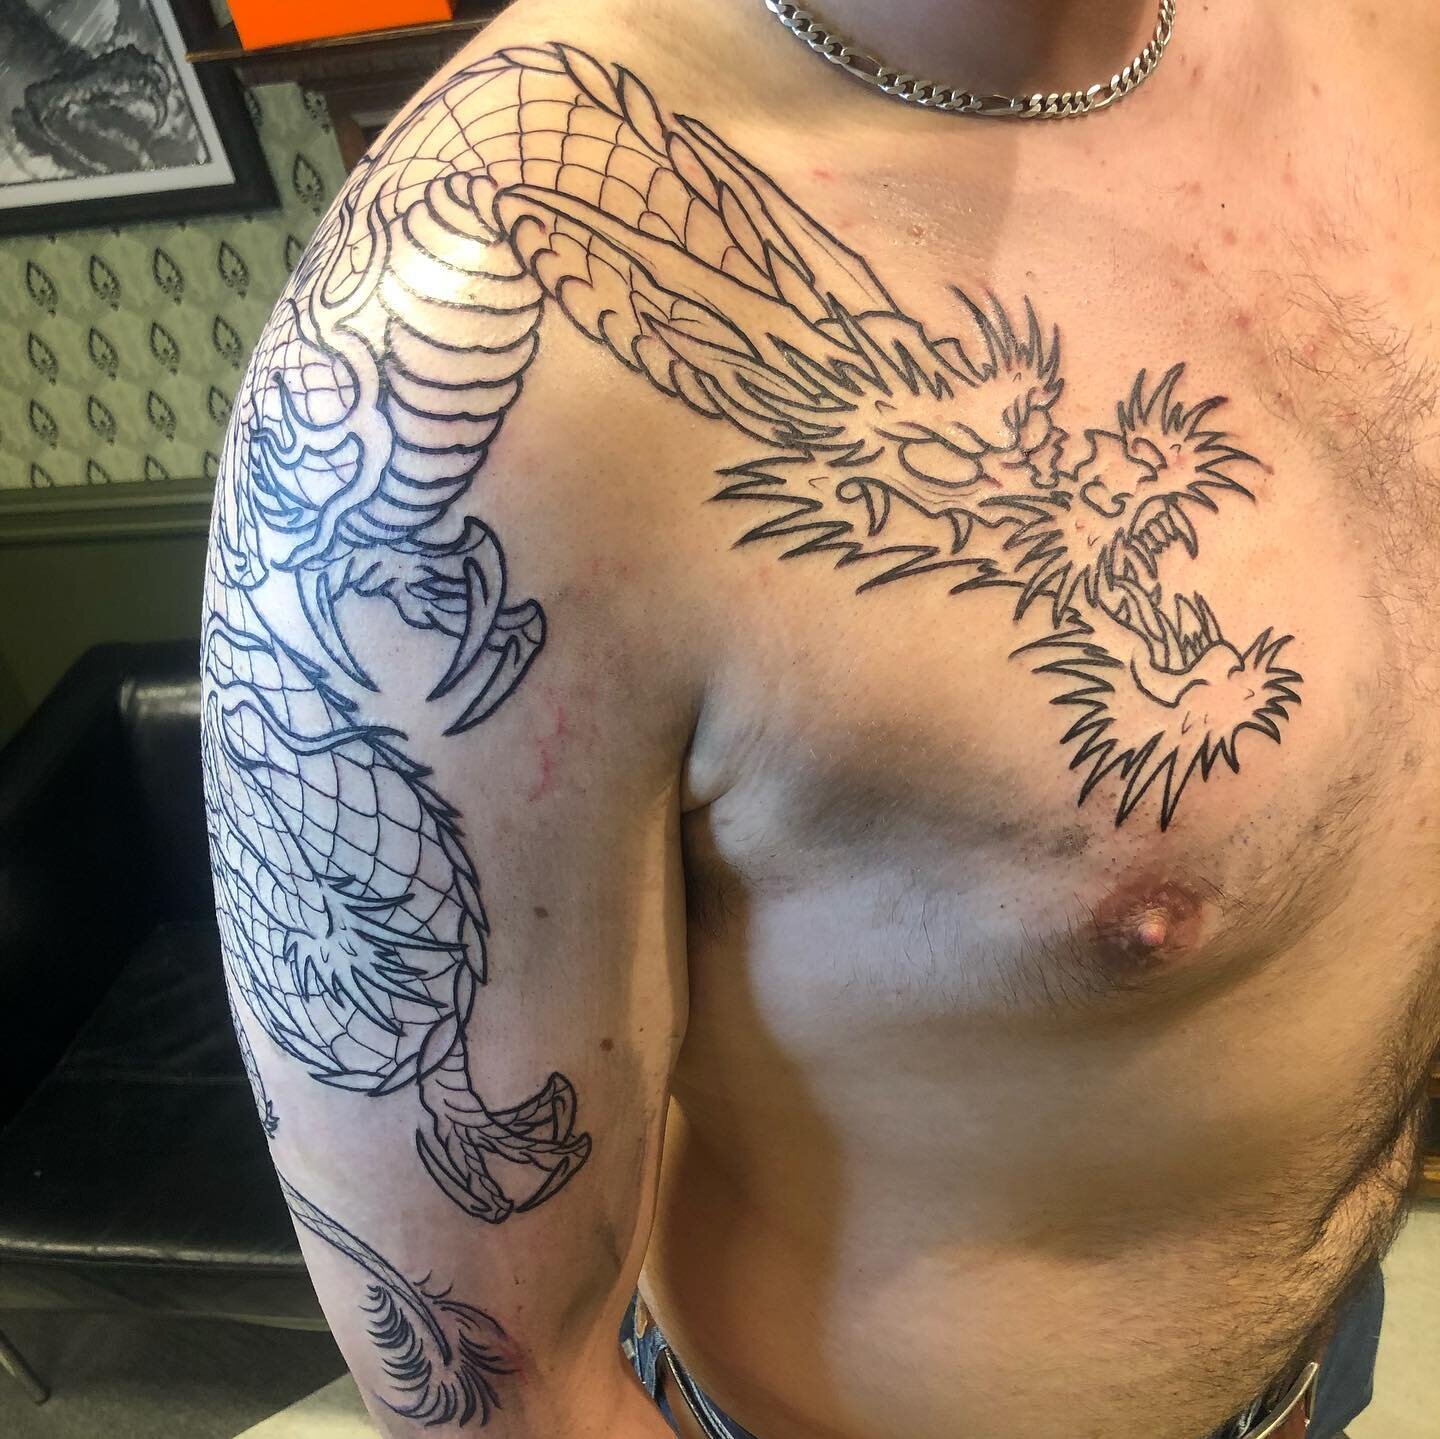 More dragons! We&rsquo;ll be adding color and background to this later. Thanks for the trust!

If you&rsquo;d like to get something like this, get in touch!

#Letsbuzz #letsbuzztattoo #letsbuzzbergen #bergen #tattoo #tatovering #dragontattoo #japanes